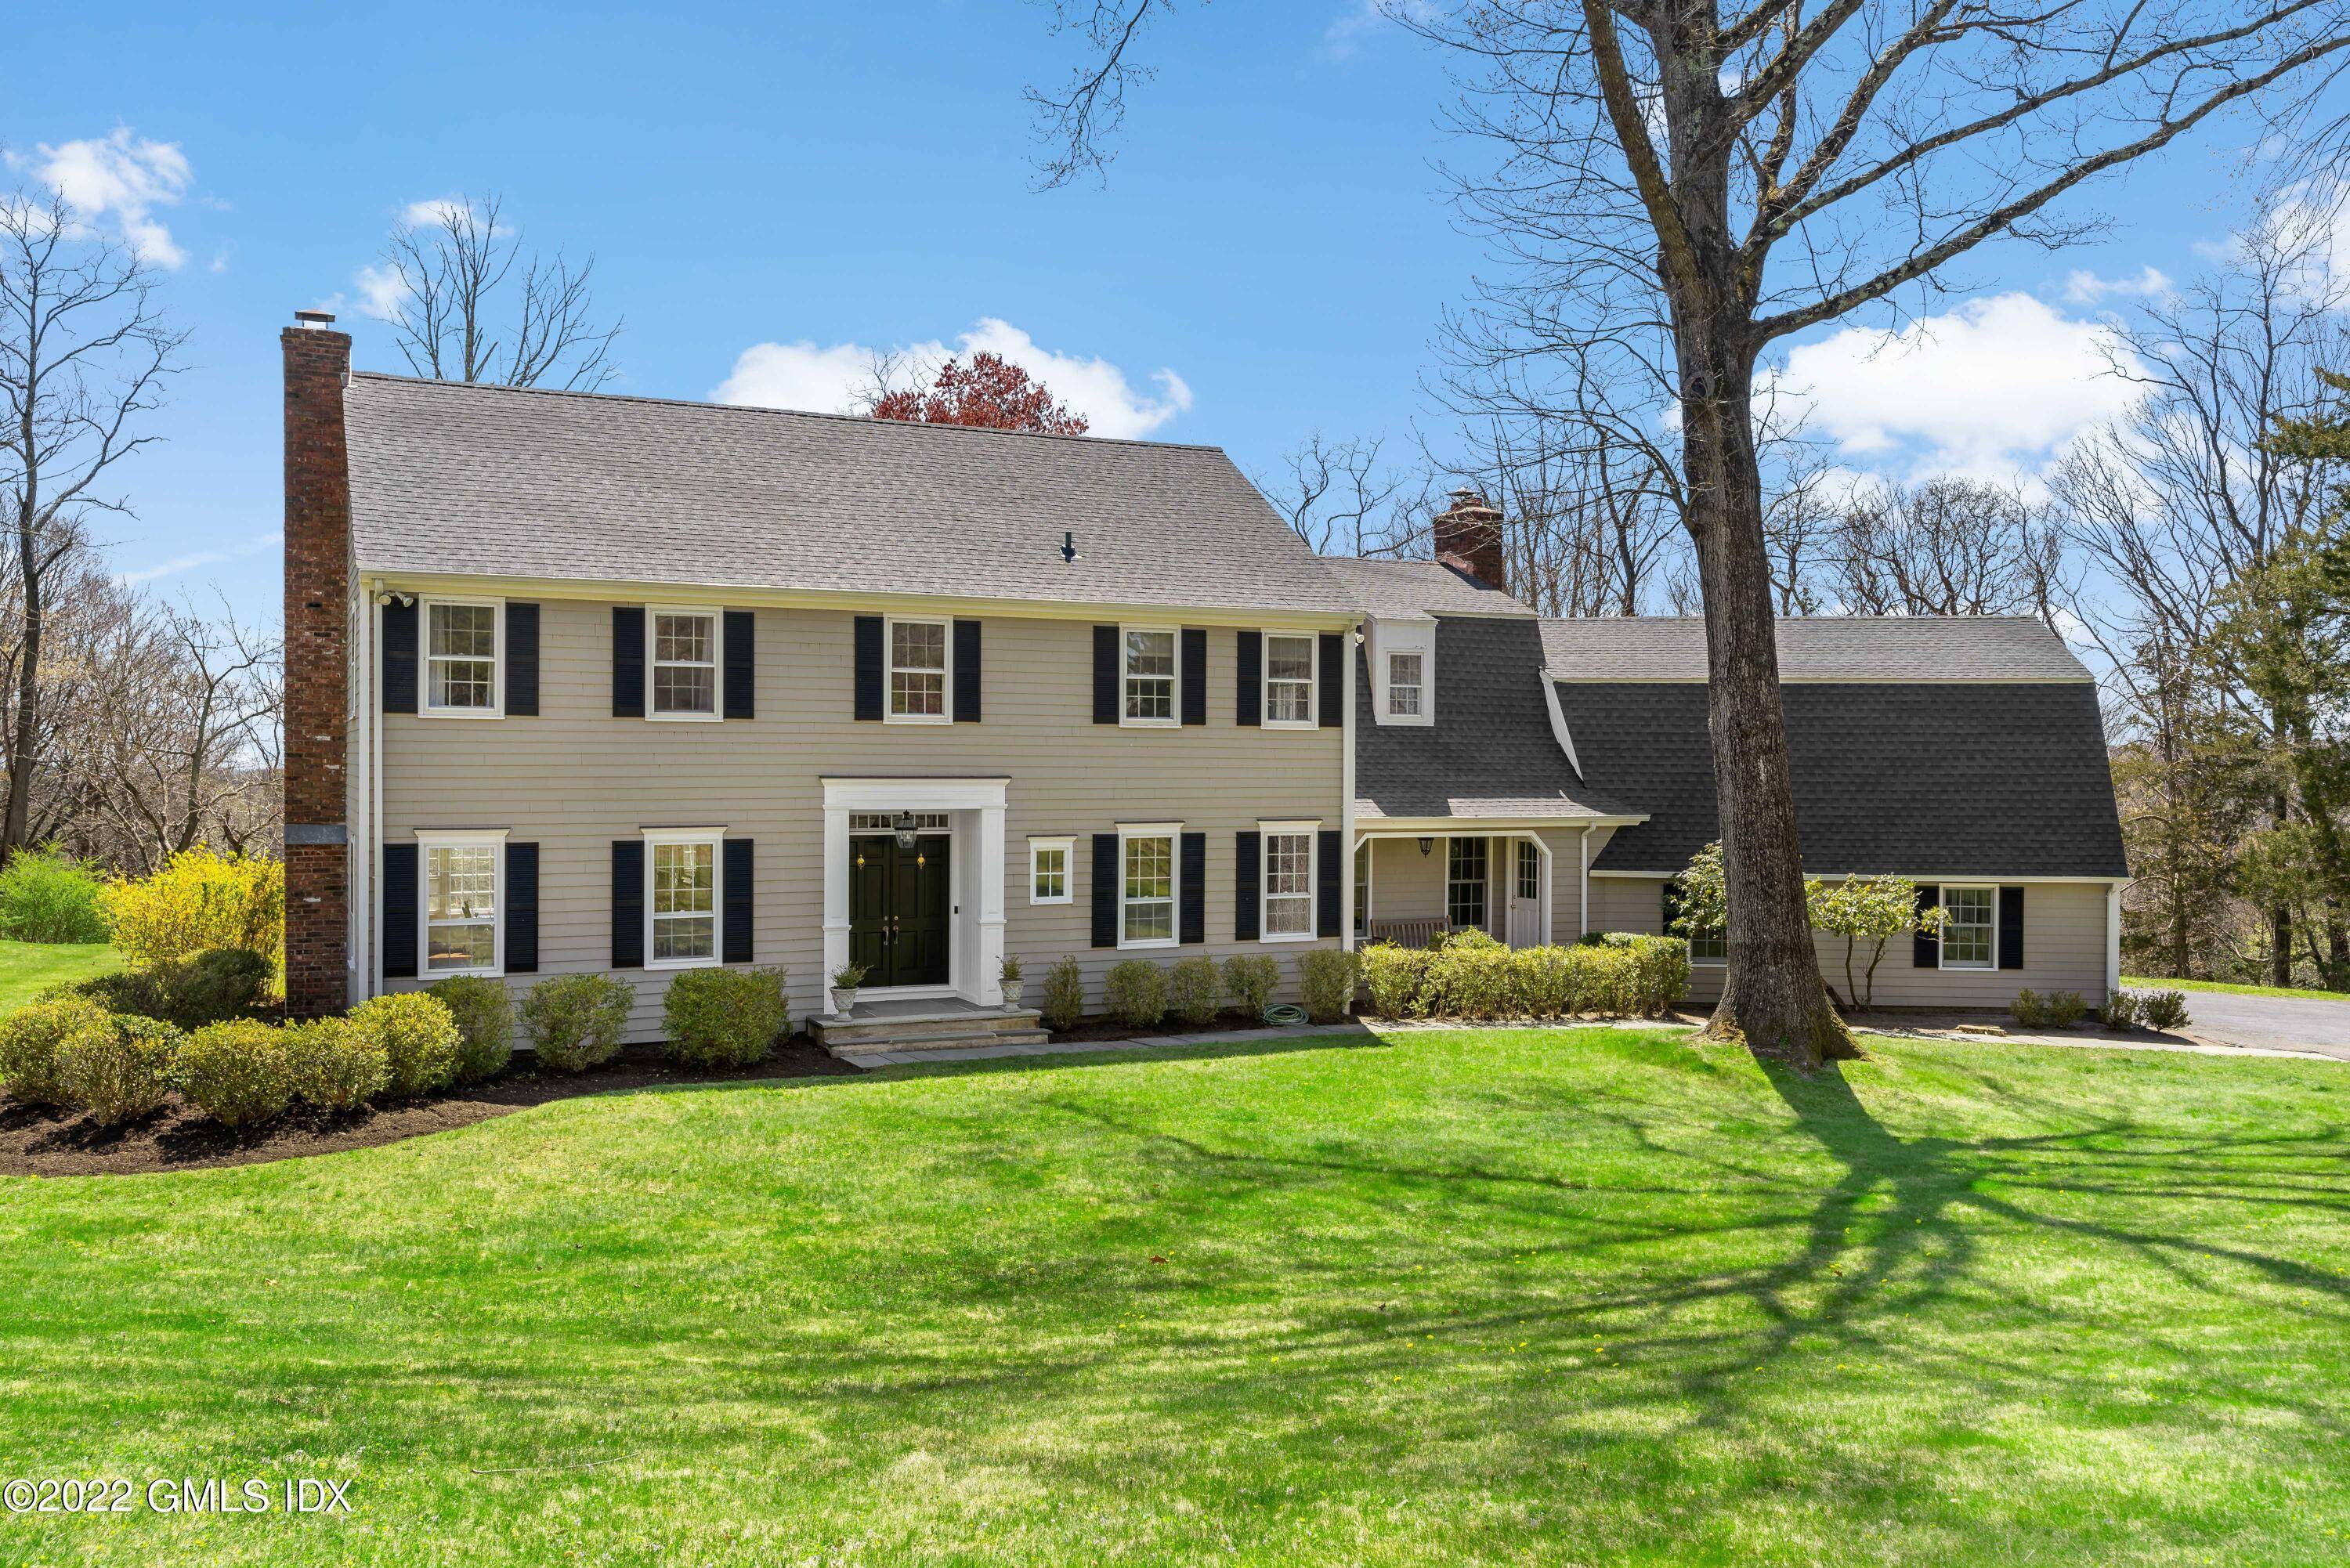 Welcome to this Ridgecrest colonial located in N.